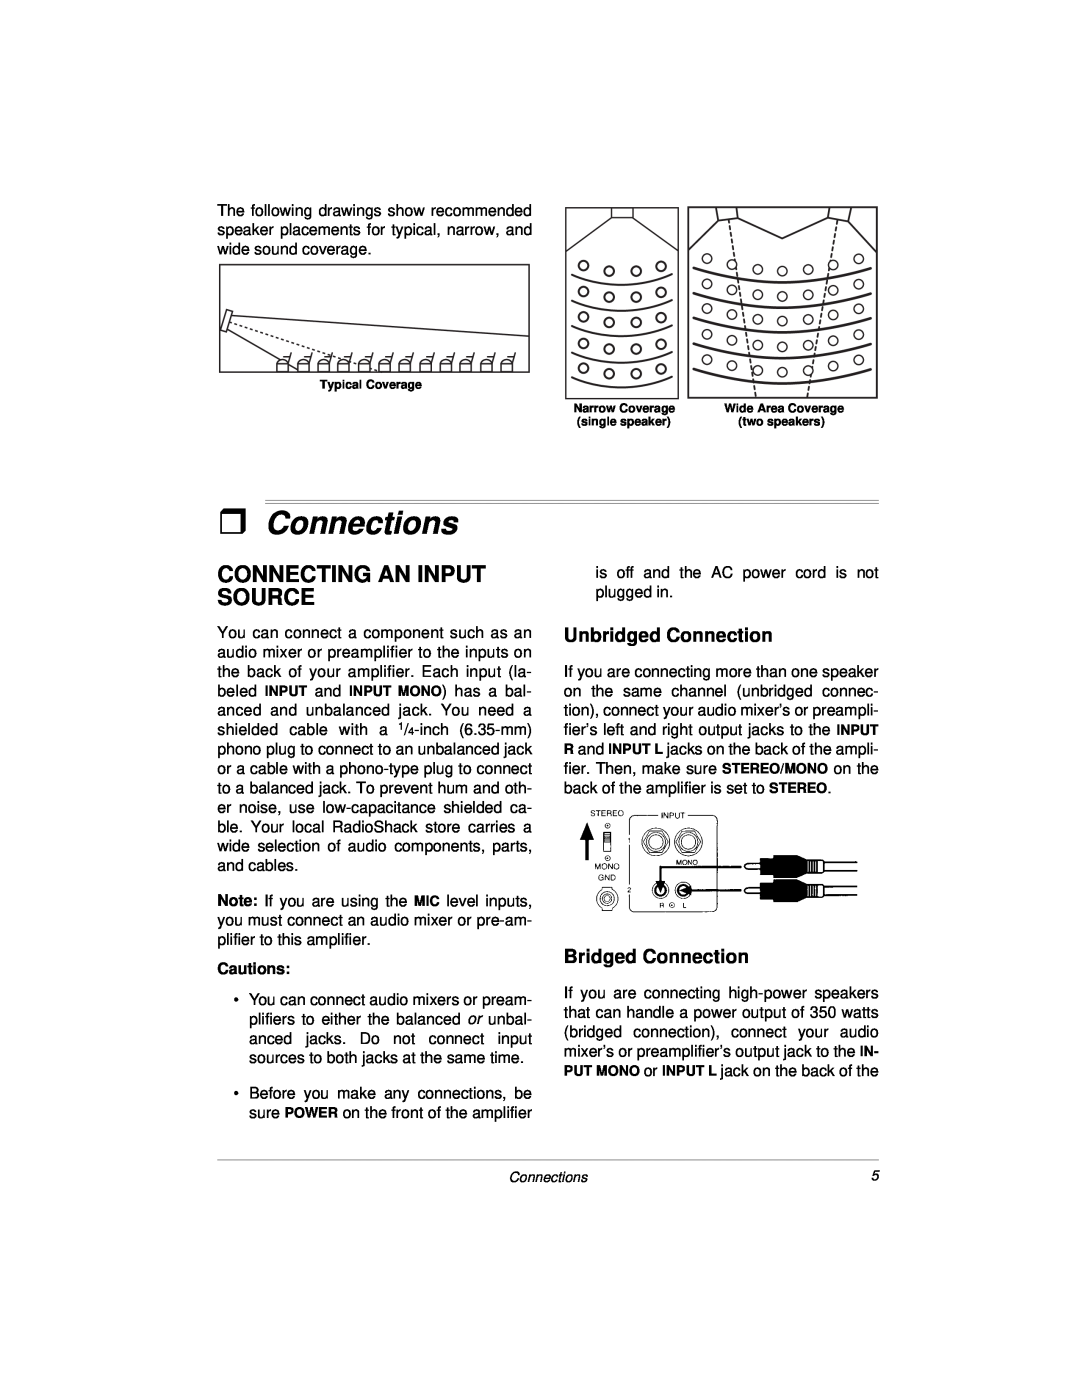 Radio Shack 32-2004, 04A00 owner manual ˆConnections, Connecting An Input Source, Unbridged Connection, Bridged Connection 